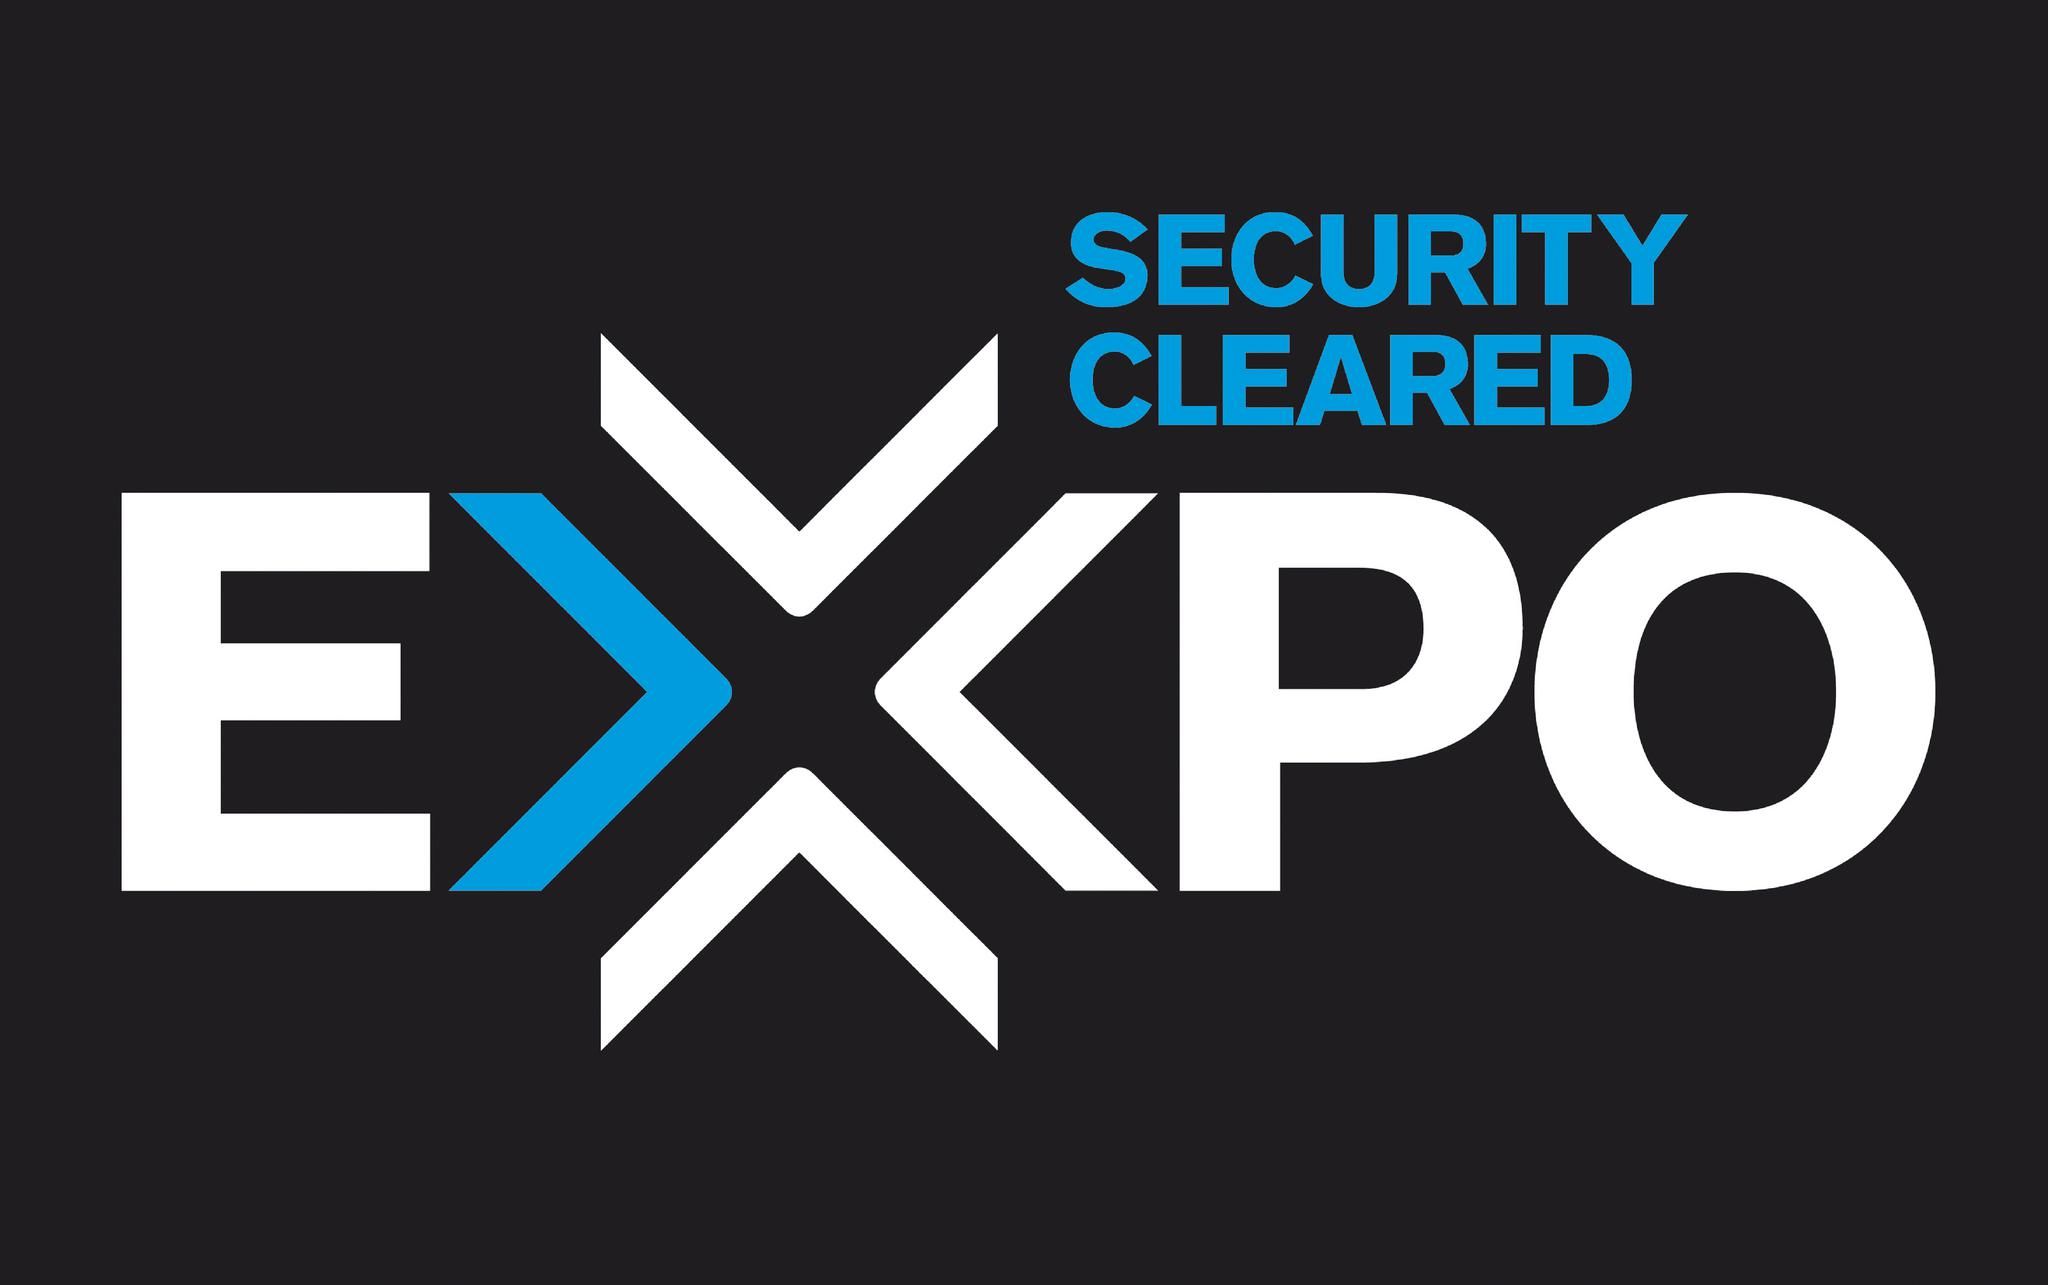 Security Cleared Expo 2021